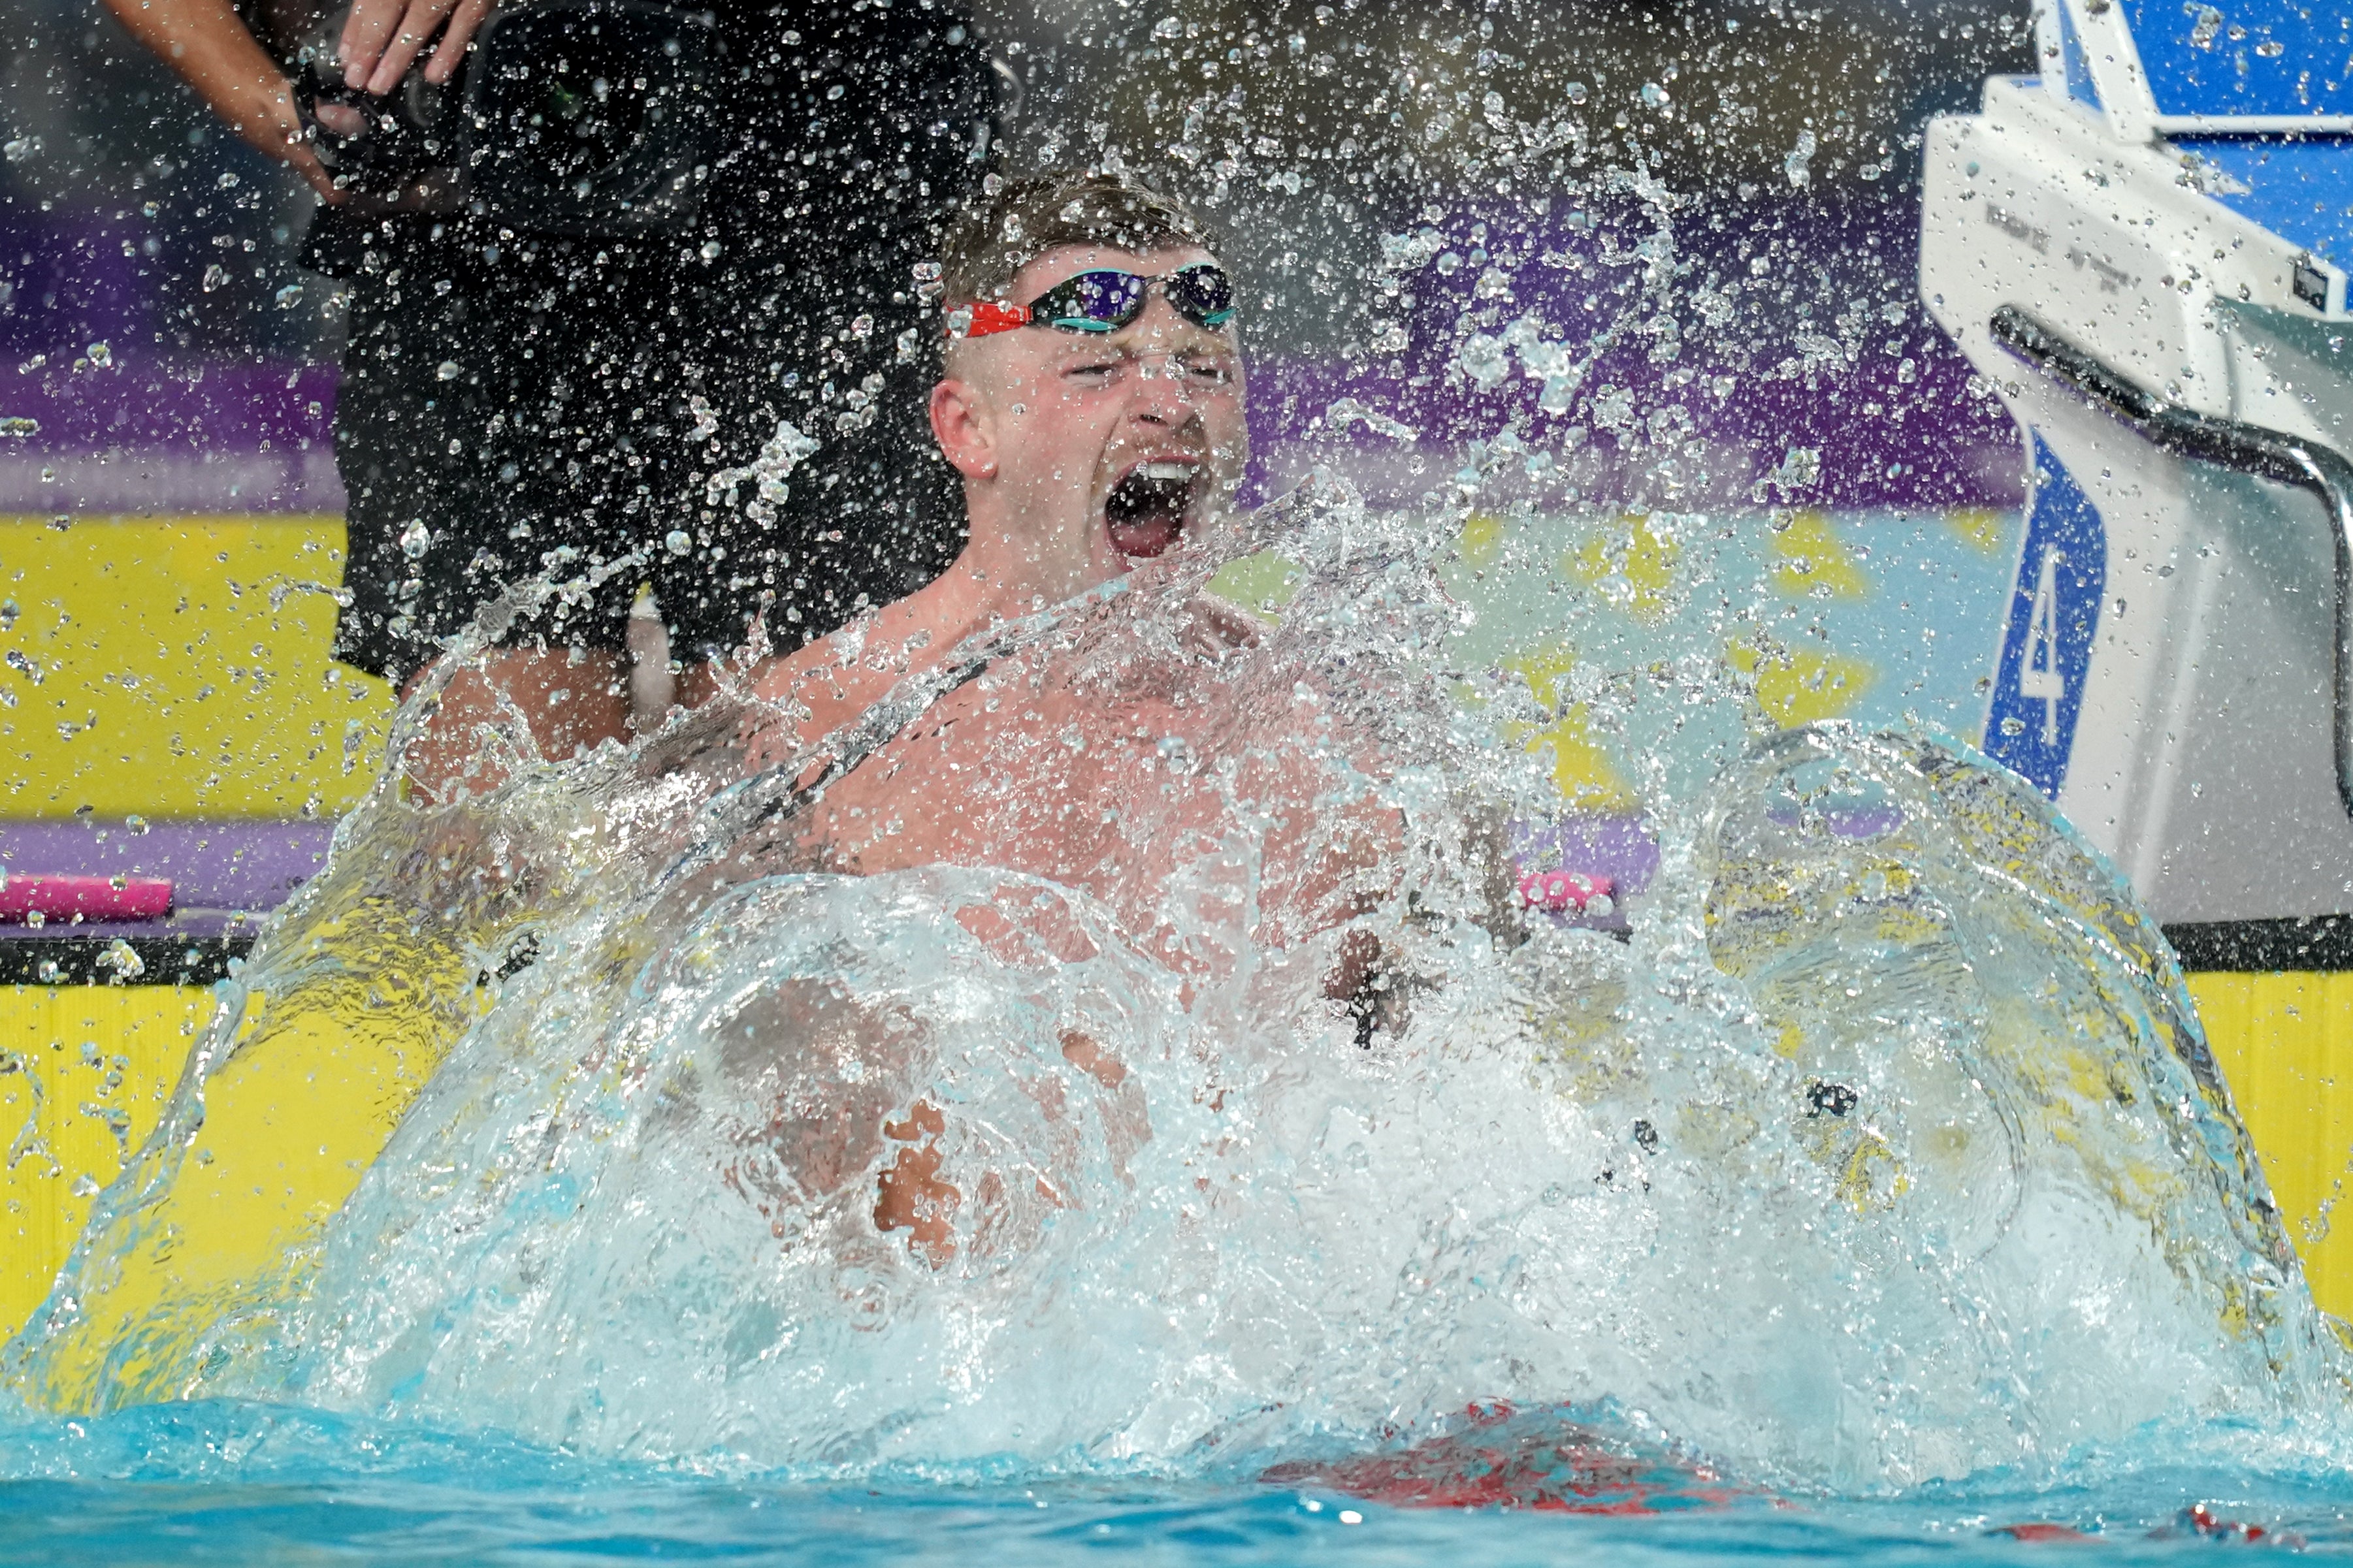 Adam Peaty roars in delight after winning the 50m breaststroke gold medal (David Davies/PA)